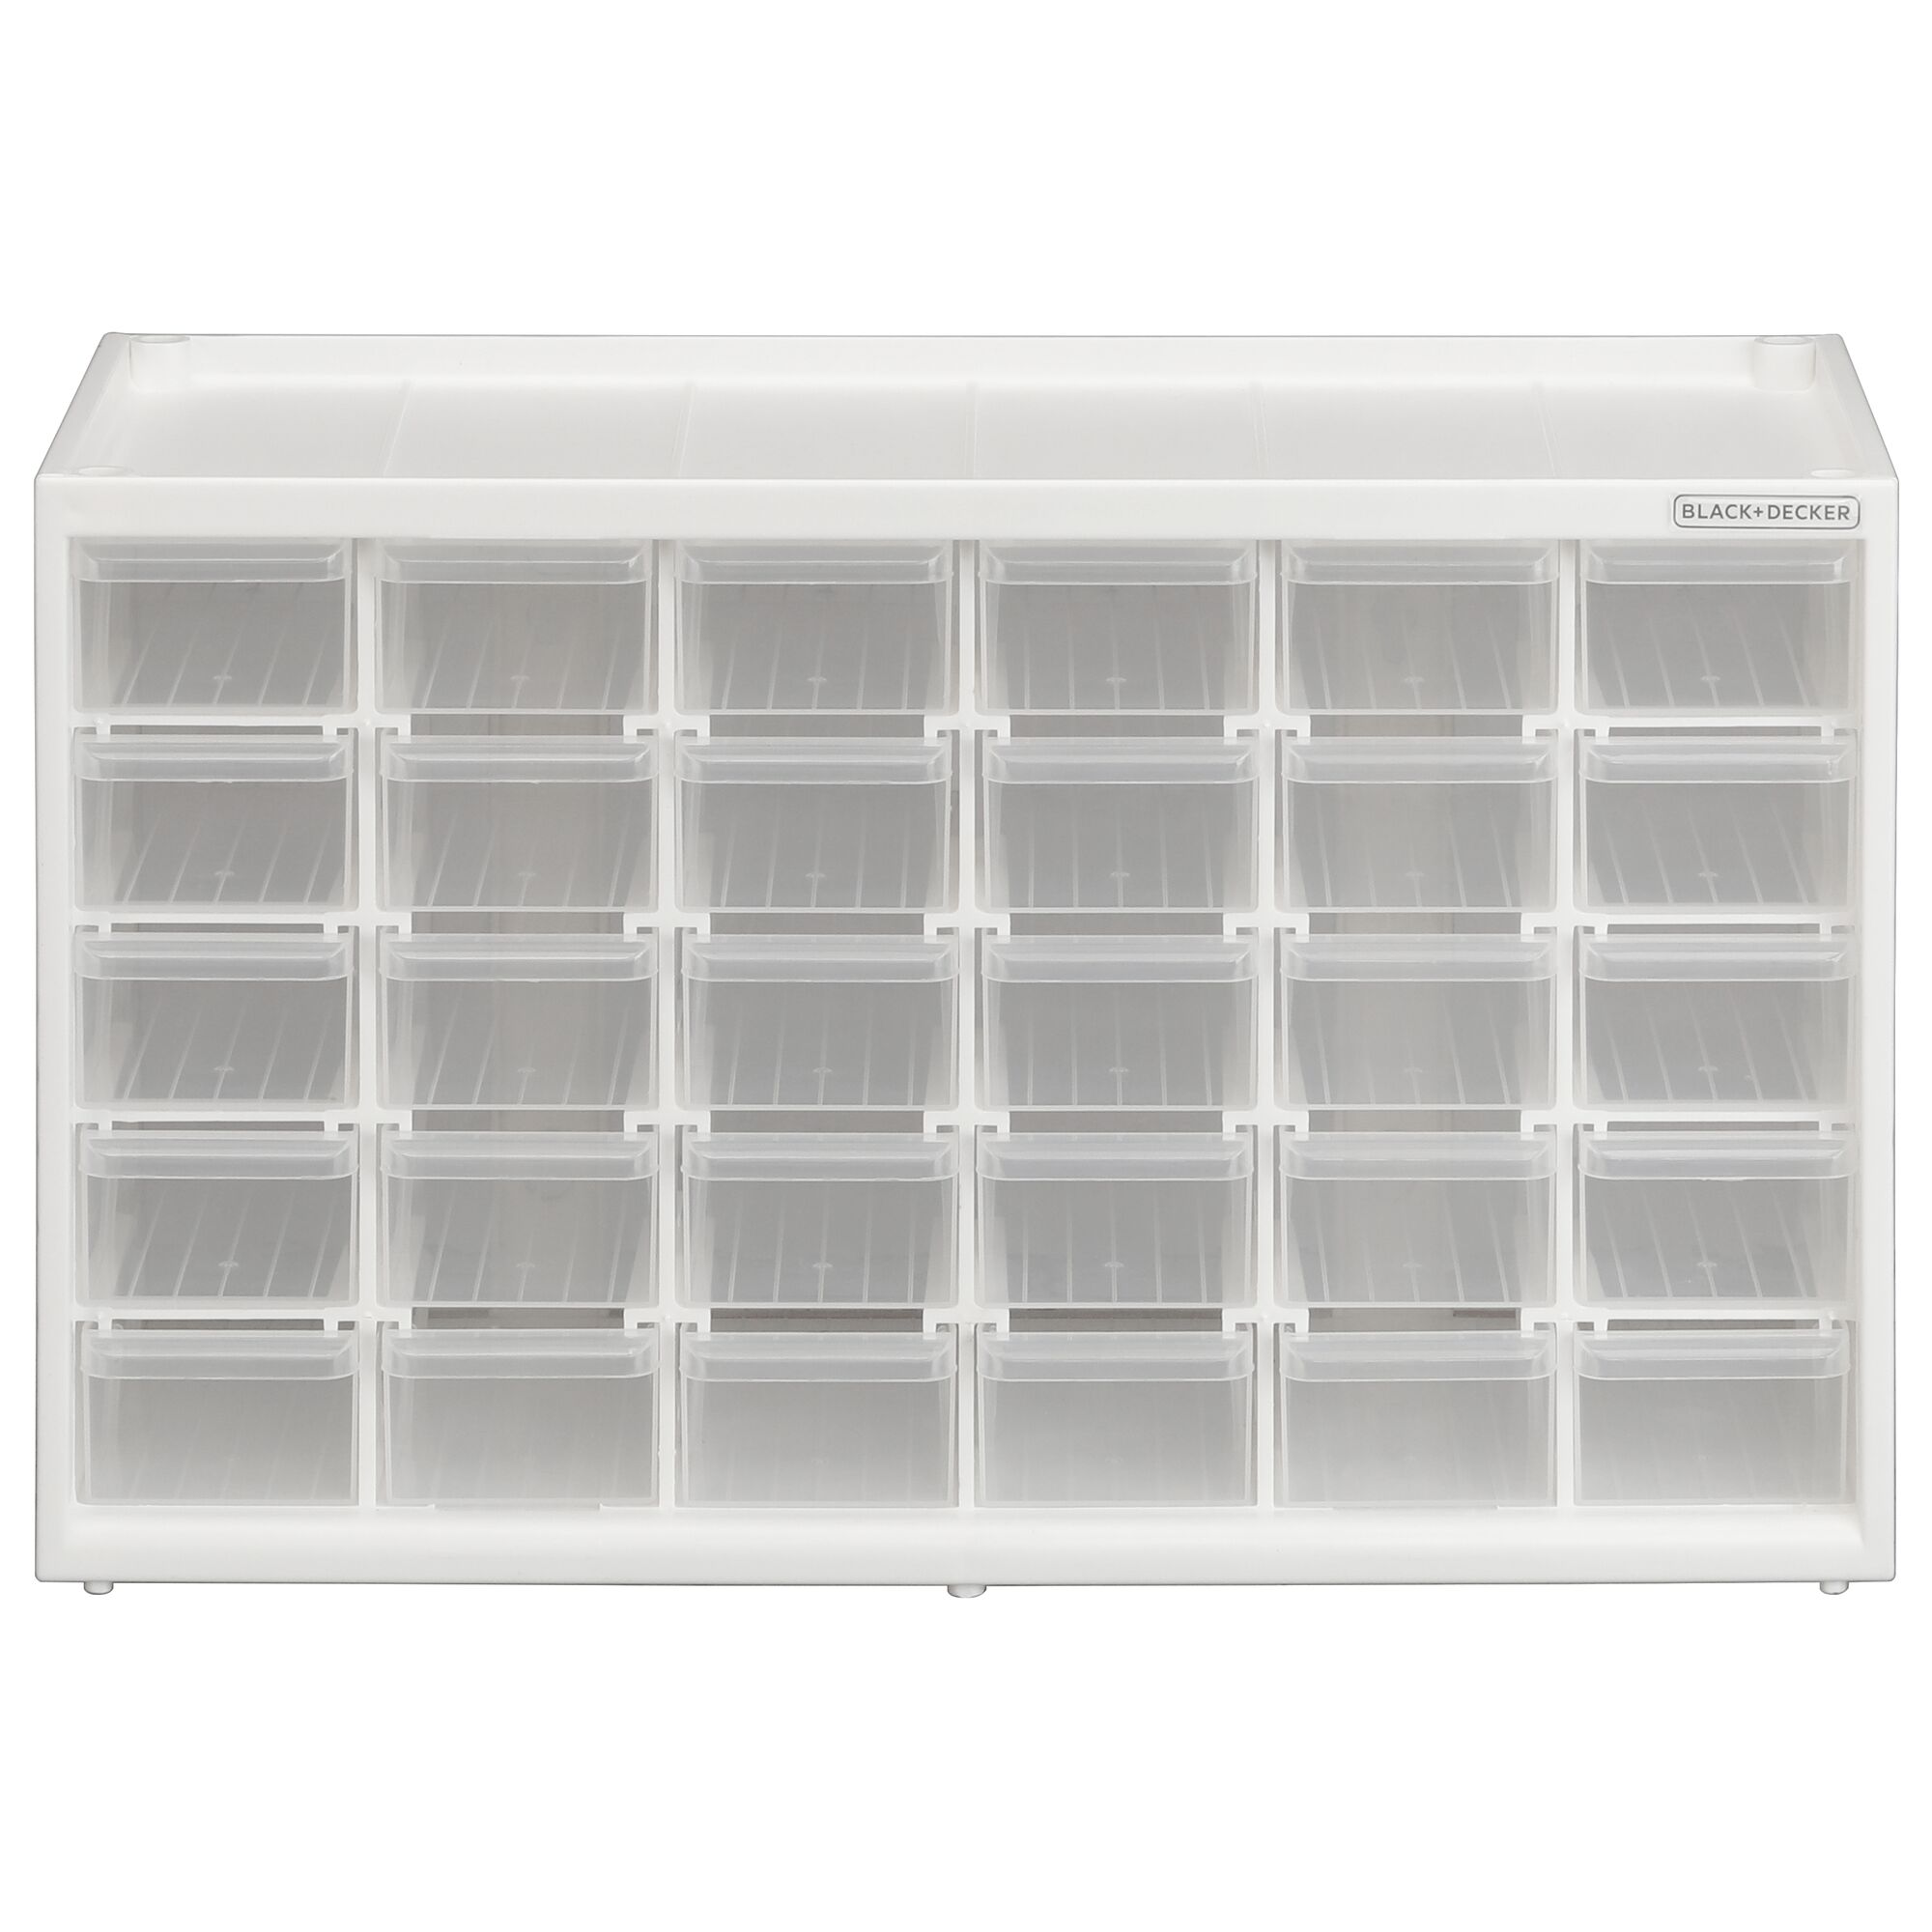 Front facing view of Black and decker Small 30 Drawer Bin System with clear drawers